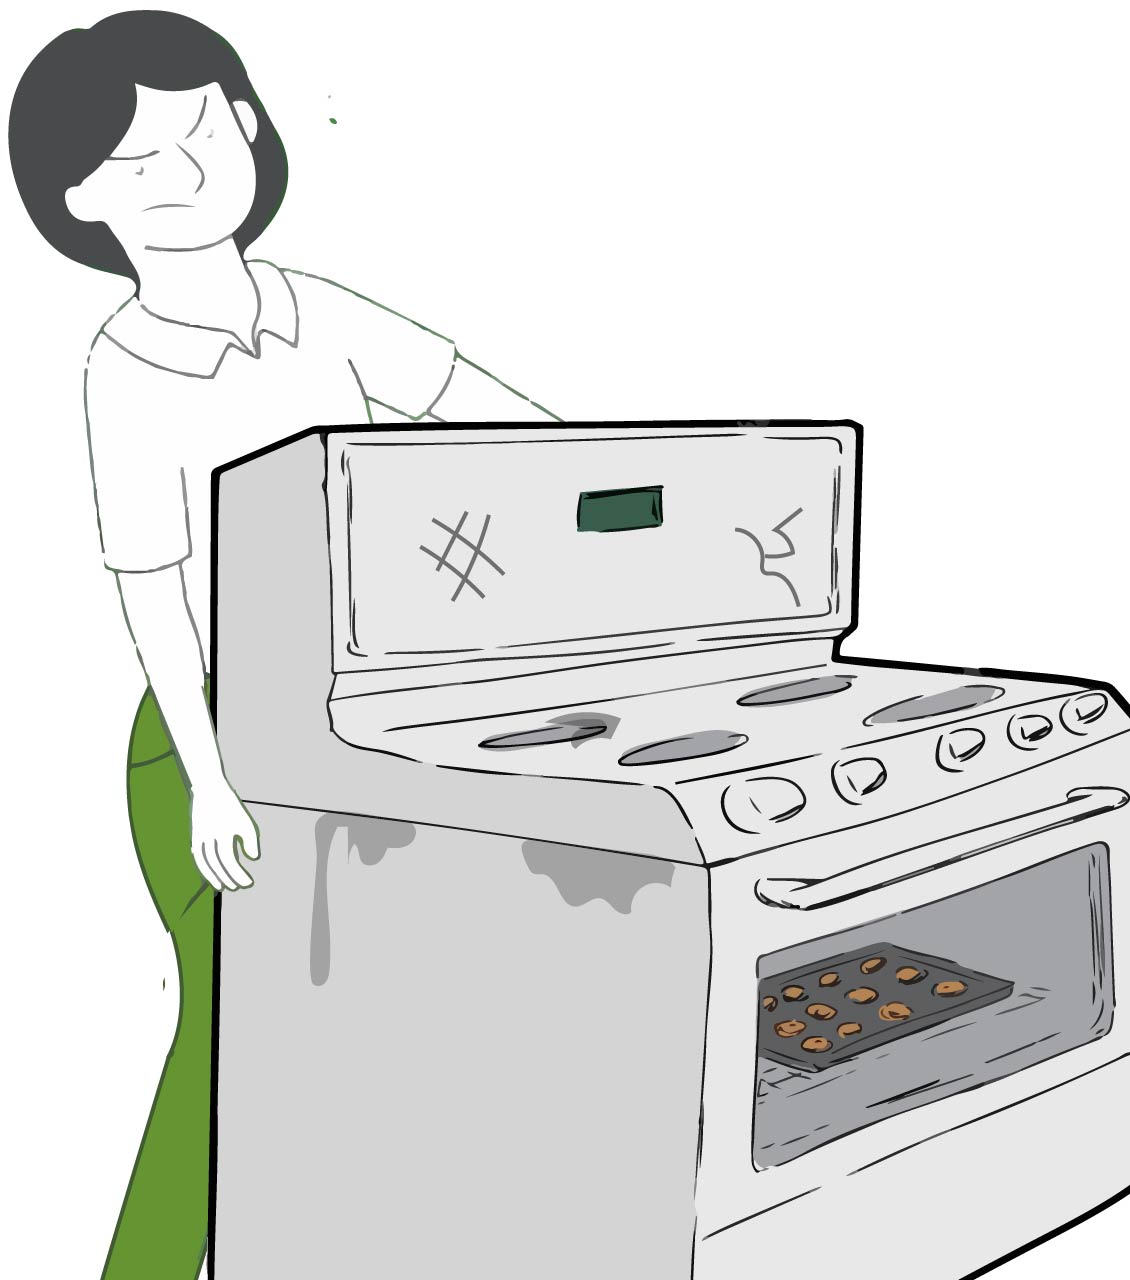 Jackson oven removal services